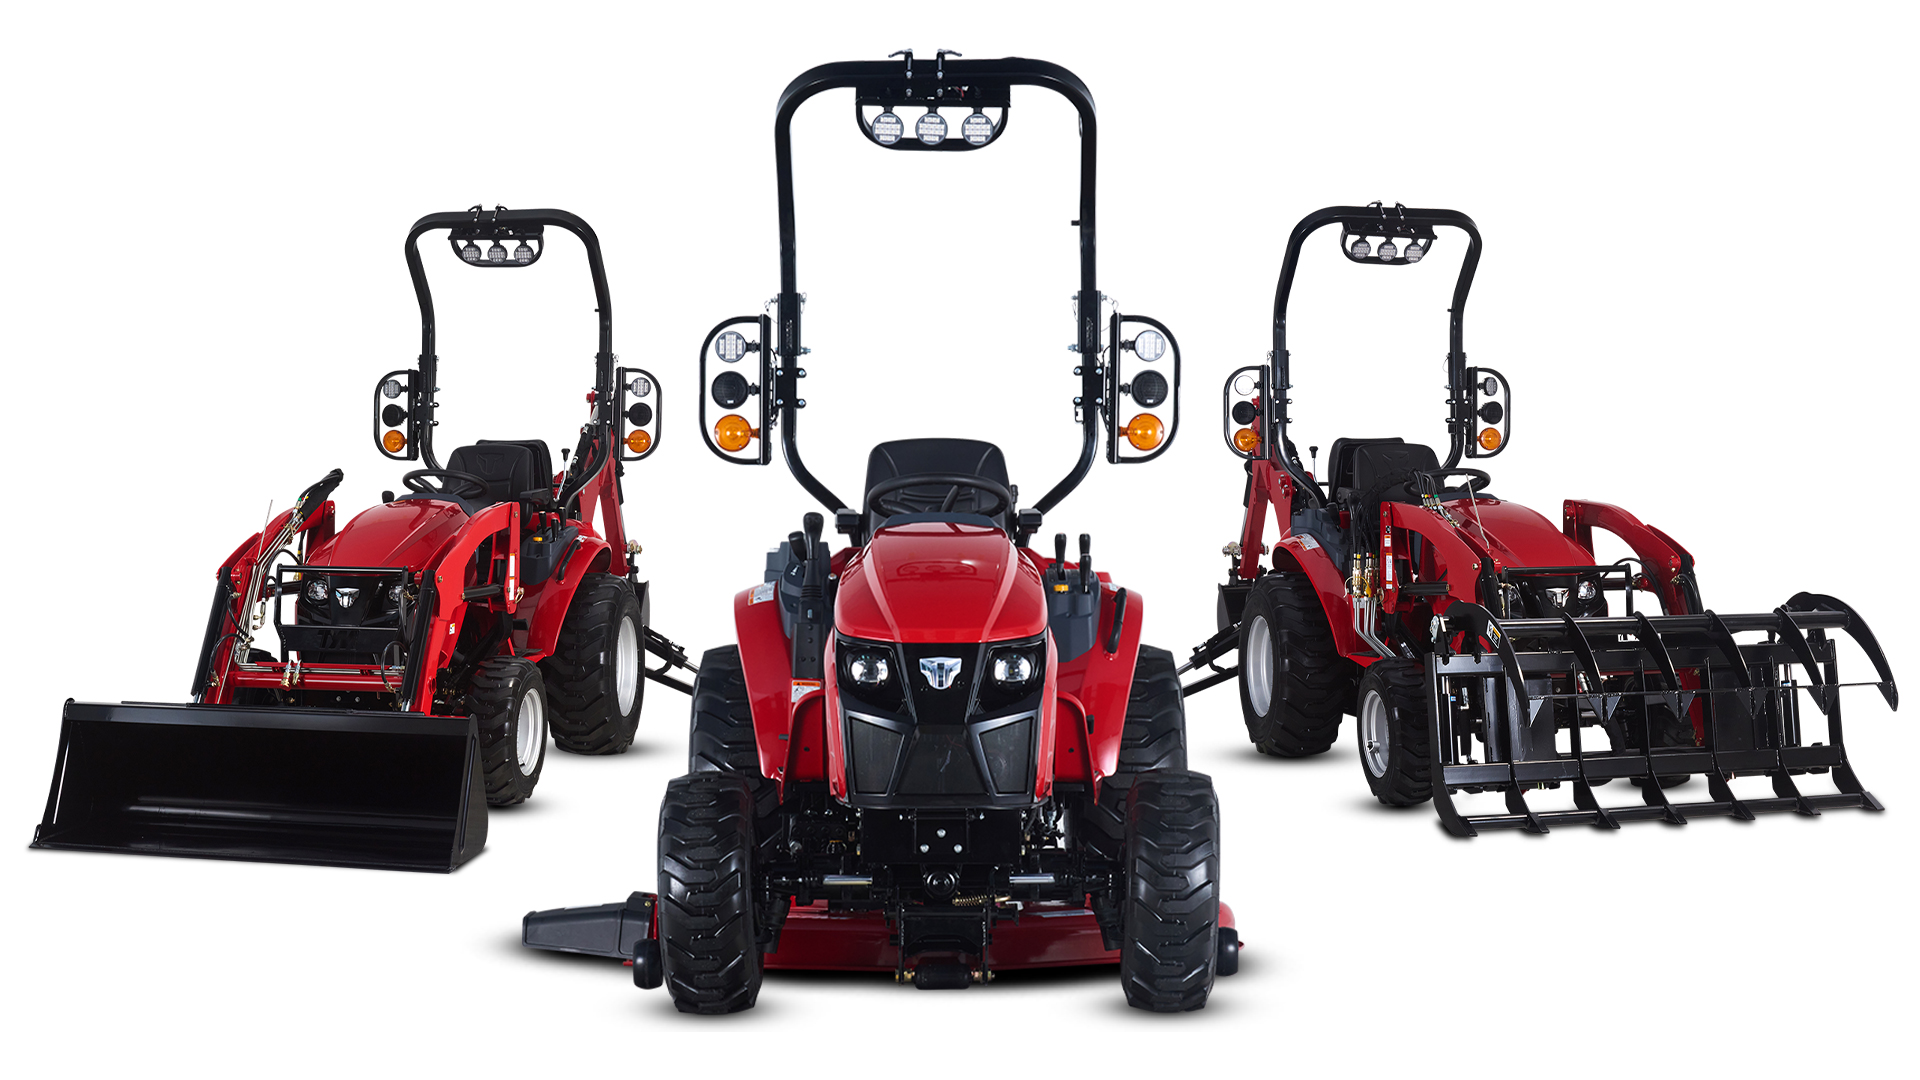 A rising trend in the sales of lawn and garden equipment